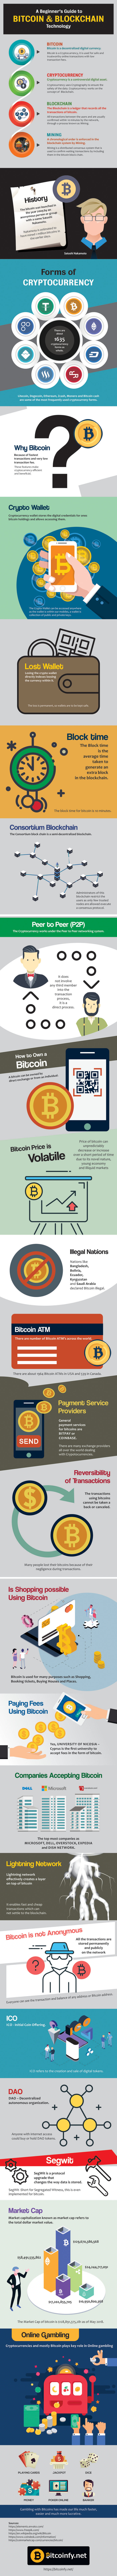 A Beginner’s Guide To Bitcoin & Blockchain Technology [Infographic]